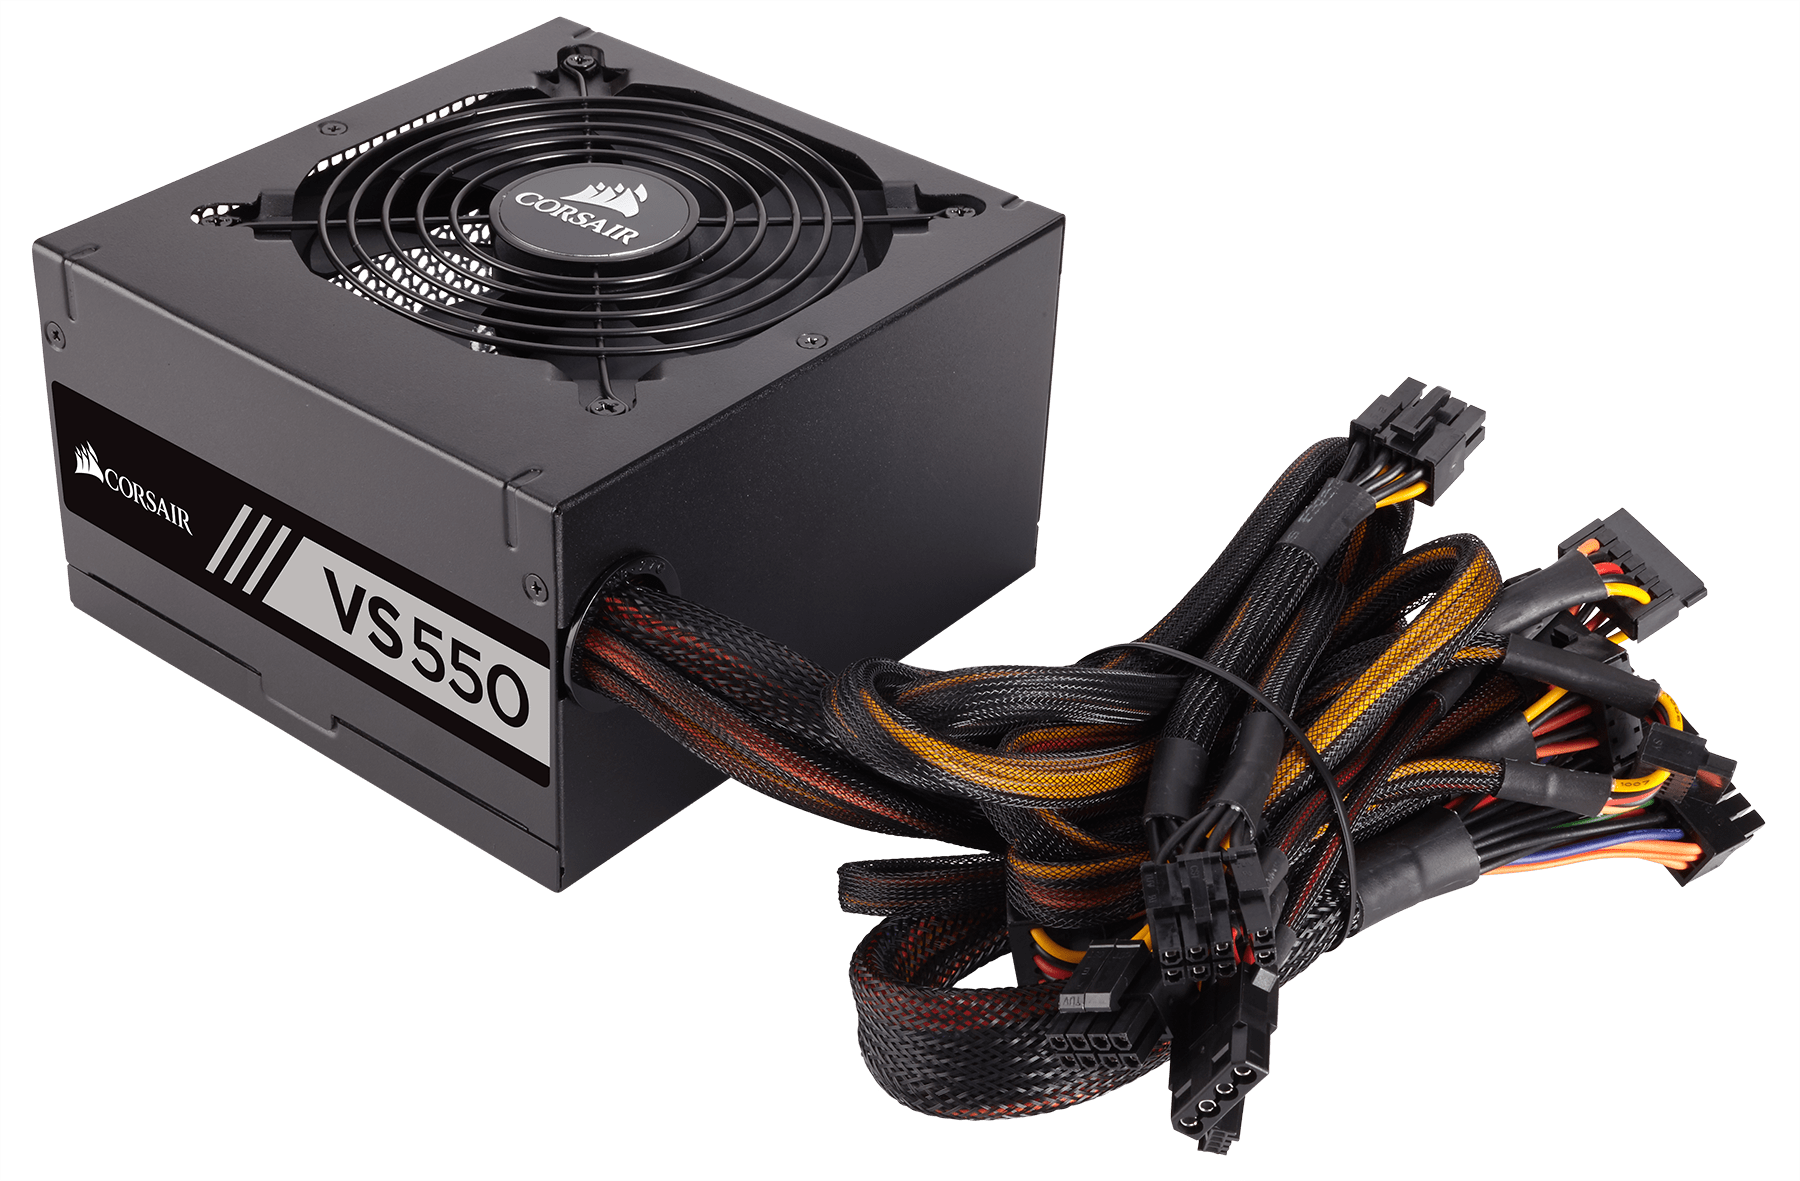 Best AMD Gaming Editing PC build under Rs. 50000 2019